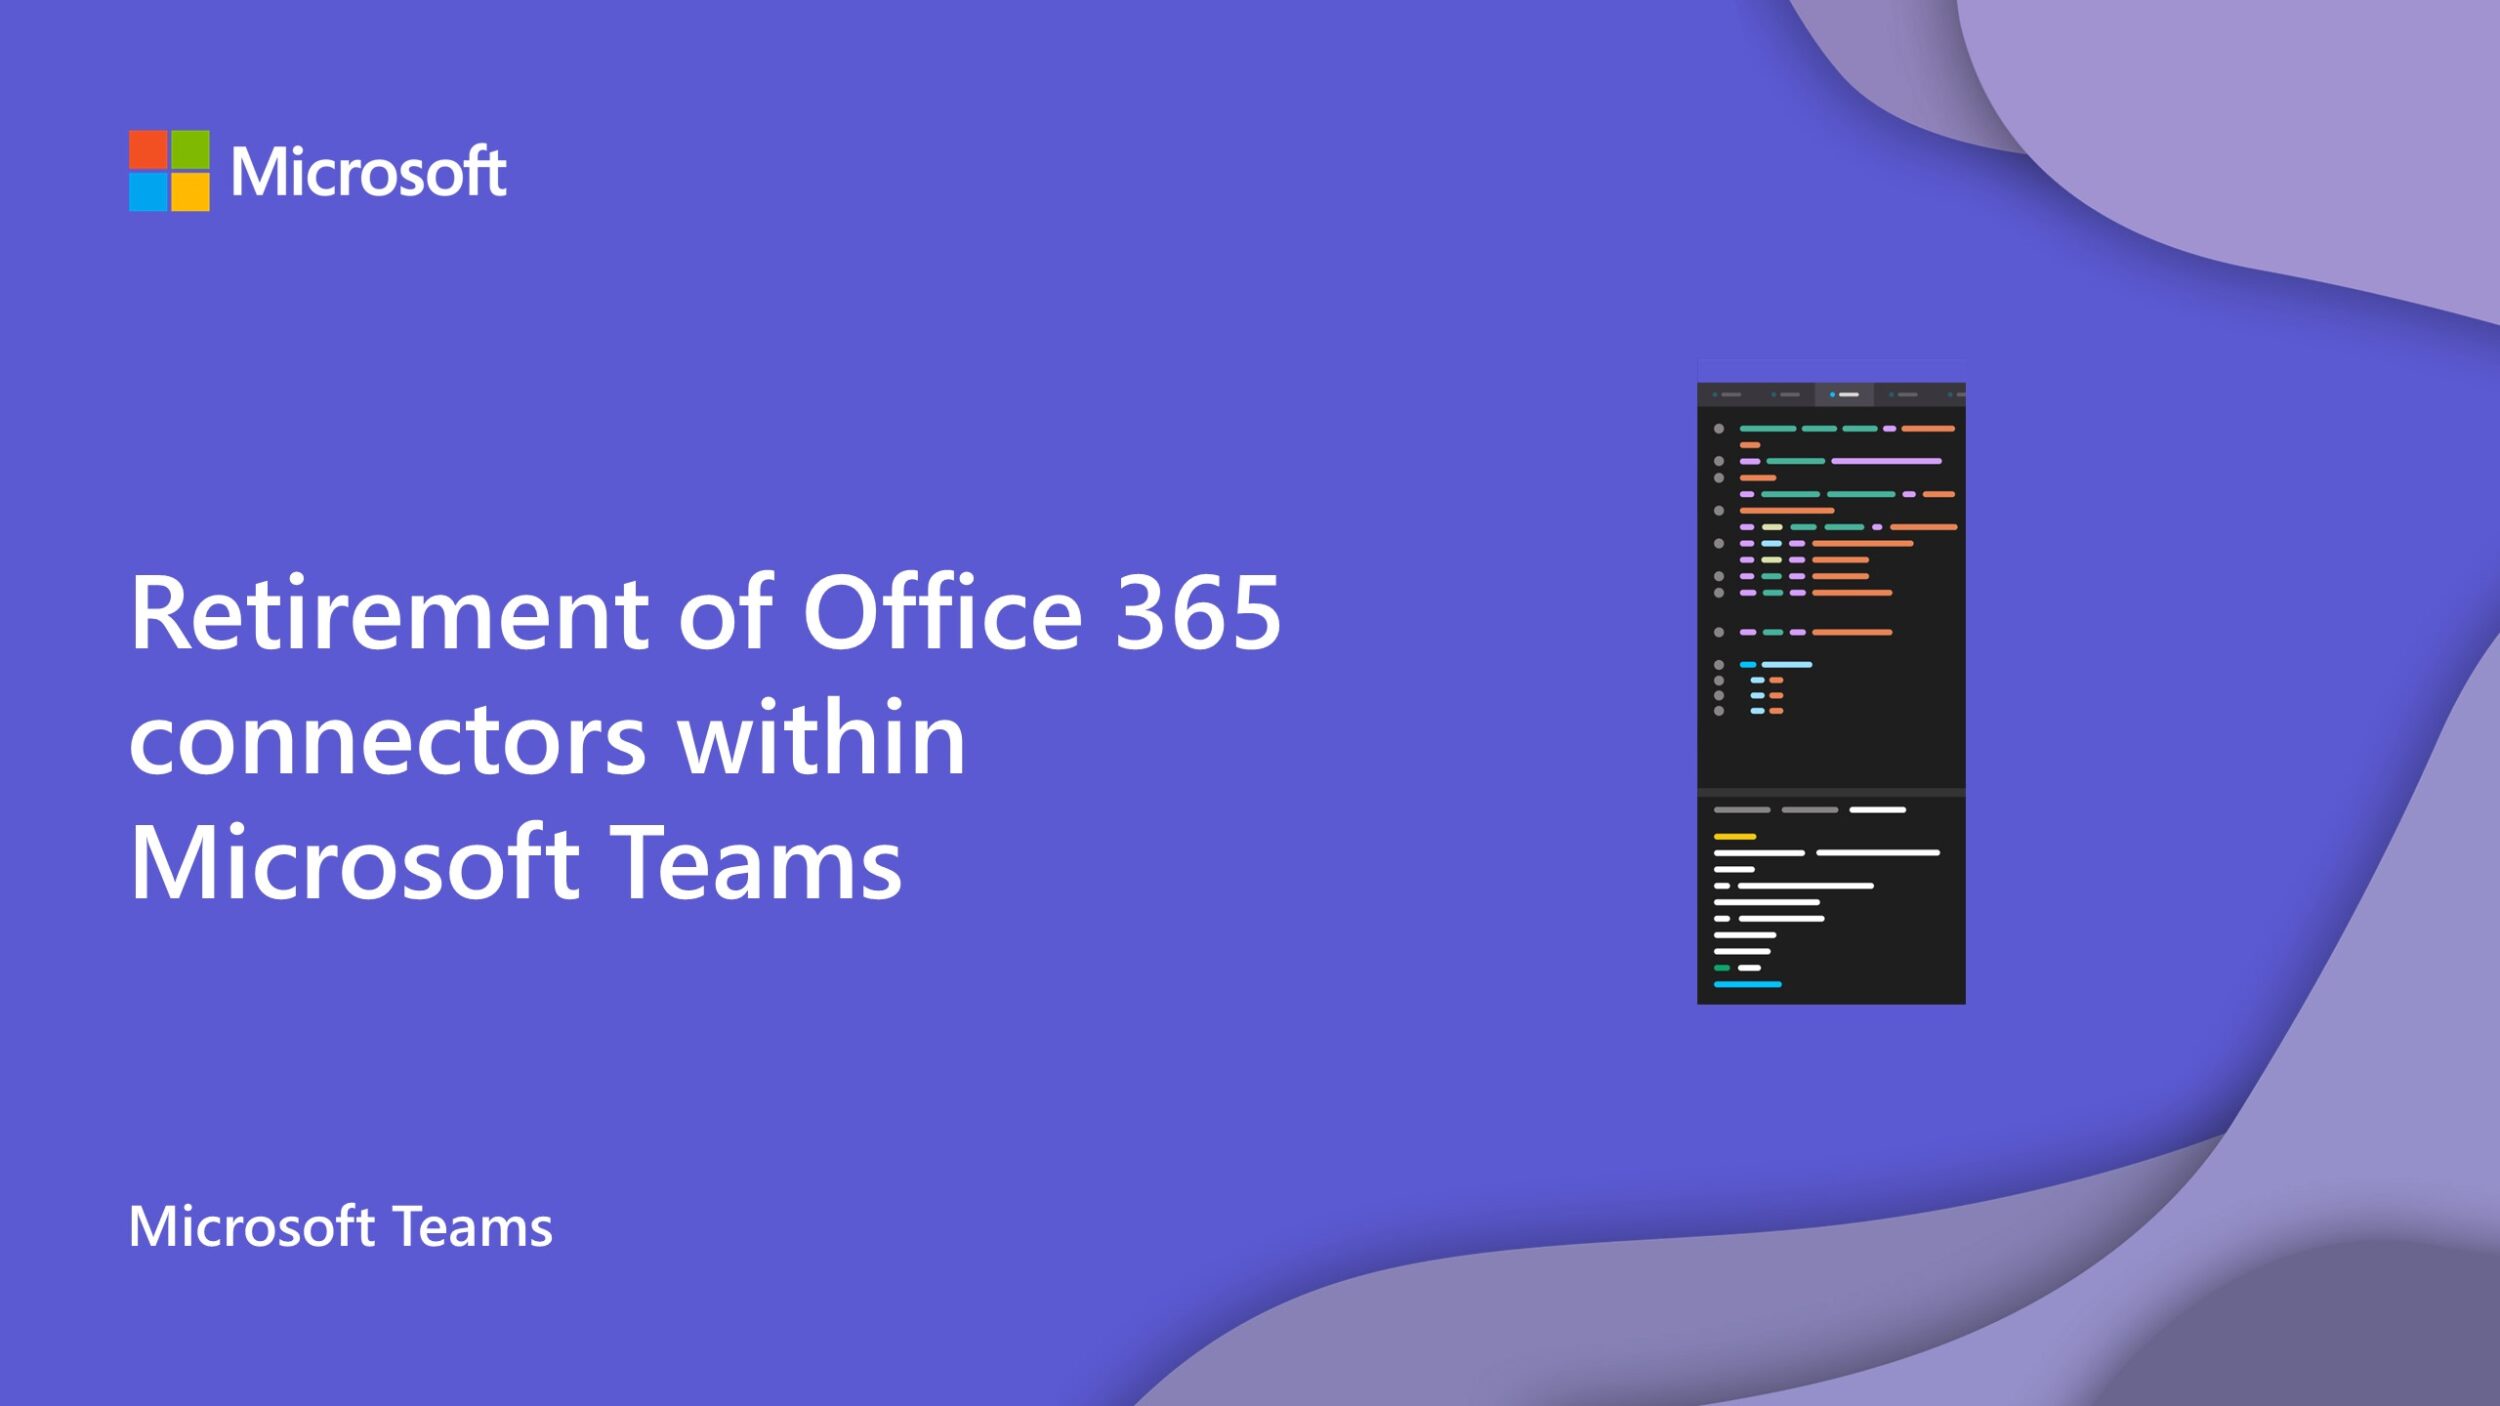 Retirement of Office 365 connectors within Microsoft Teams